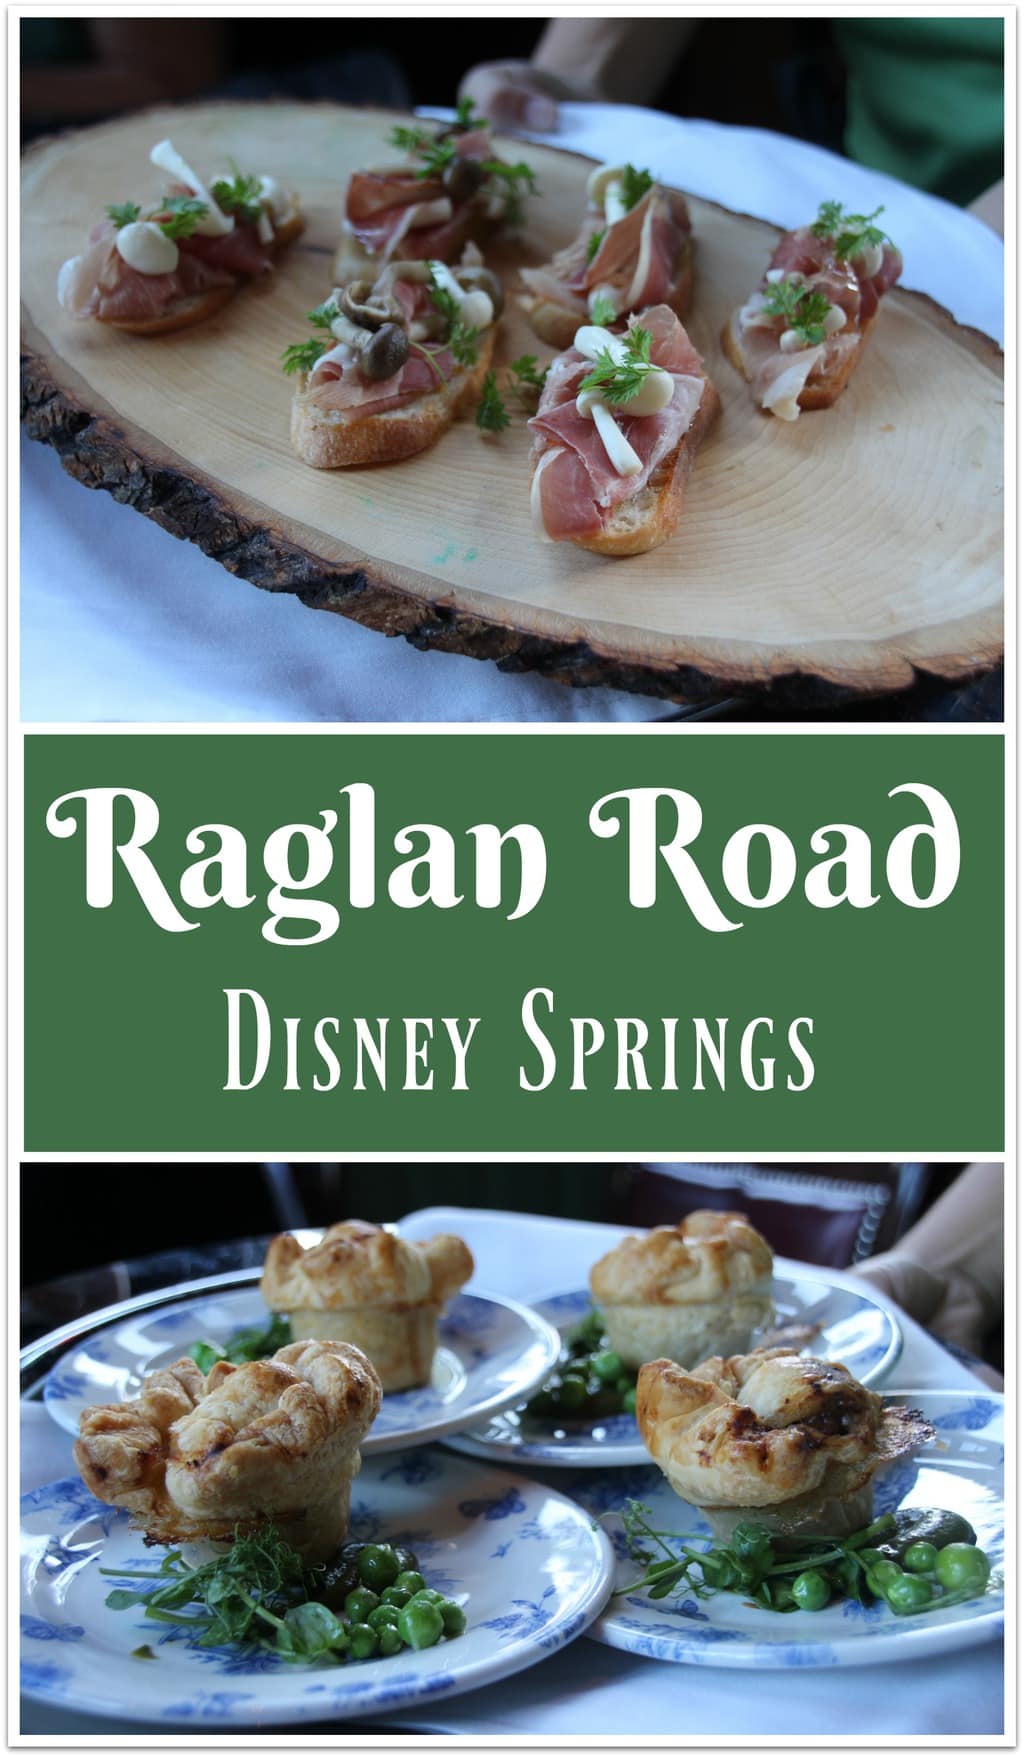 When visiting Disney Springs in Orlando, Raglan Road is a must for my family. It has been our favorite restaurant in all of Orlando for several years.